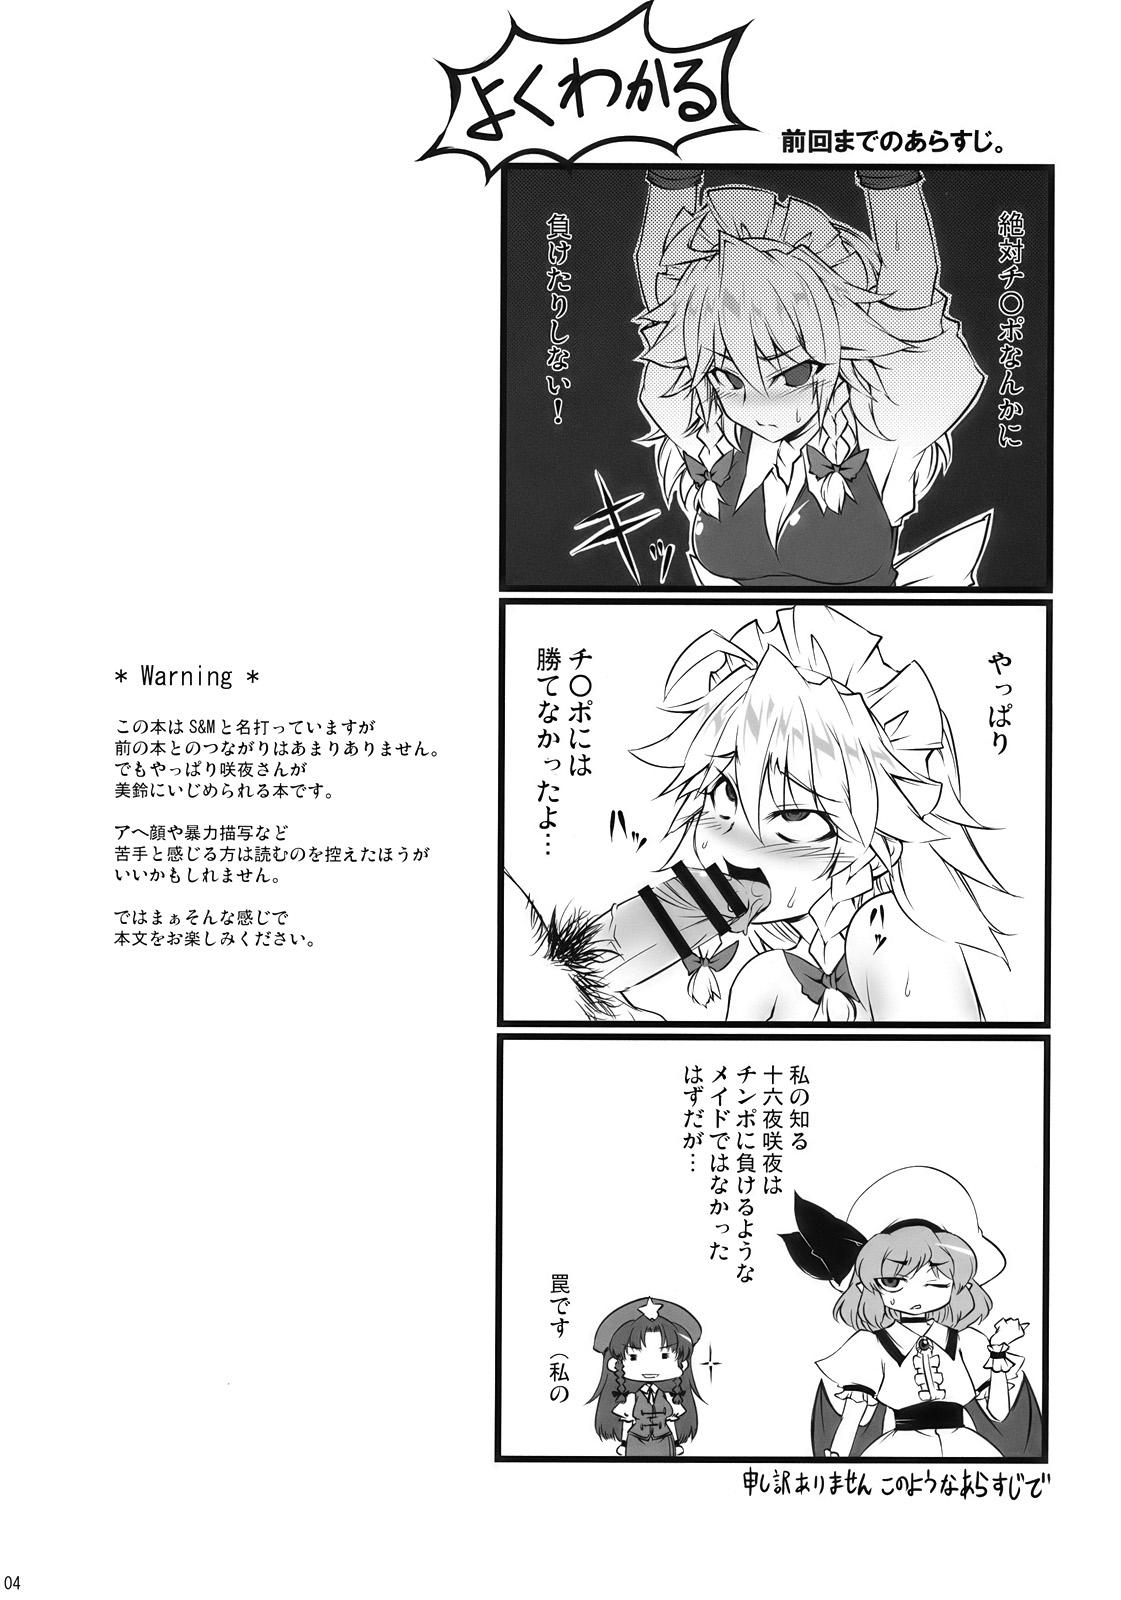 Women Fucking S&M Violence - Touhou project Pussy Orgasm - Page 4